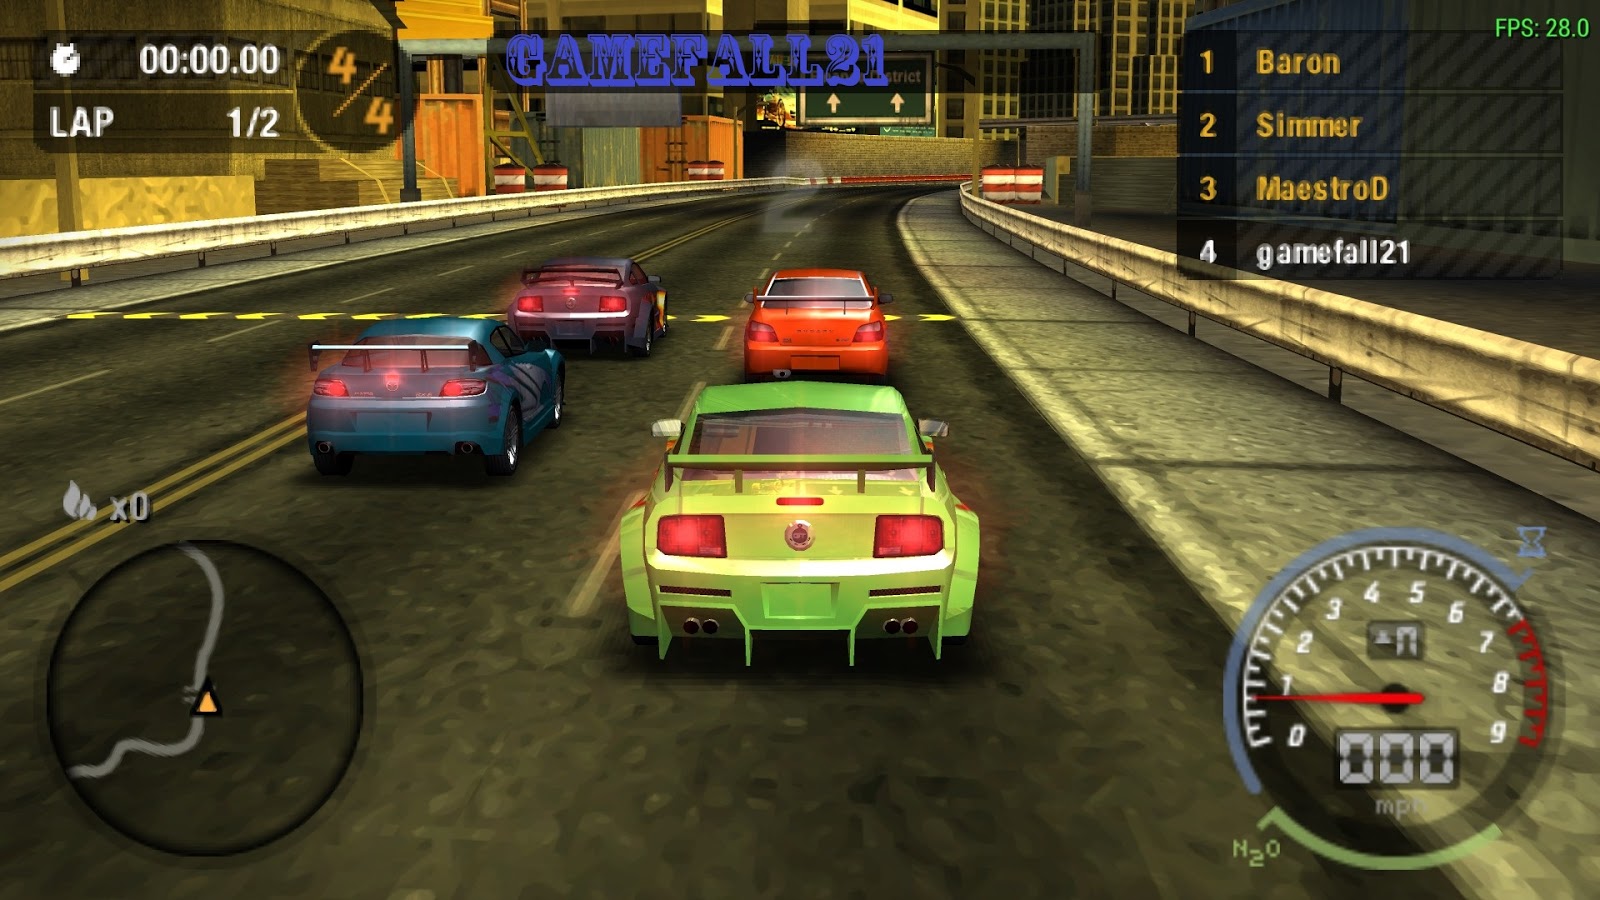 need for speed most wanted pcsx2 pnach file